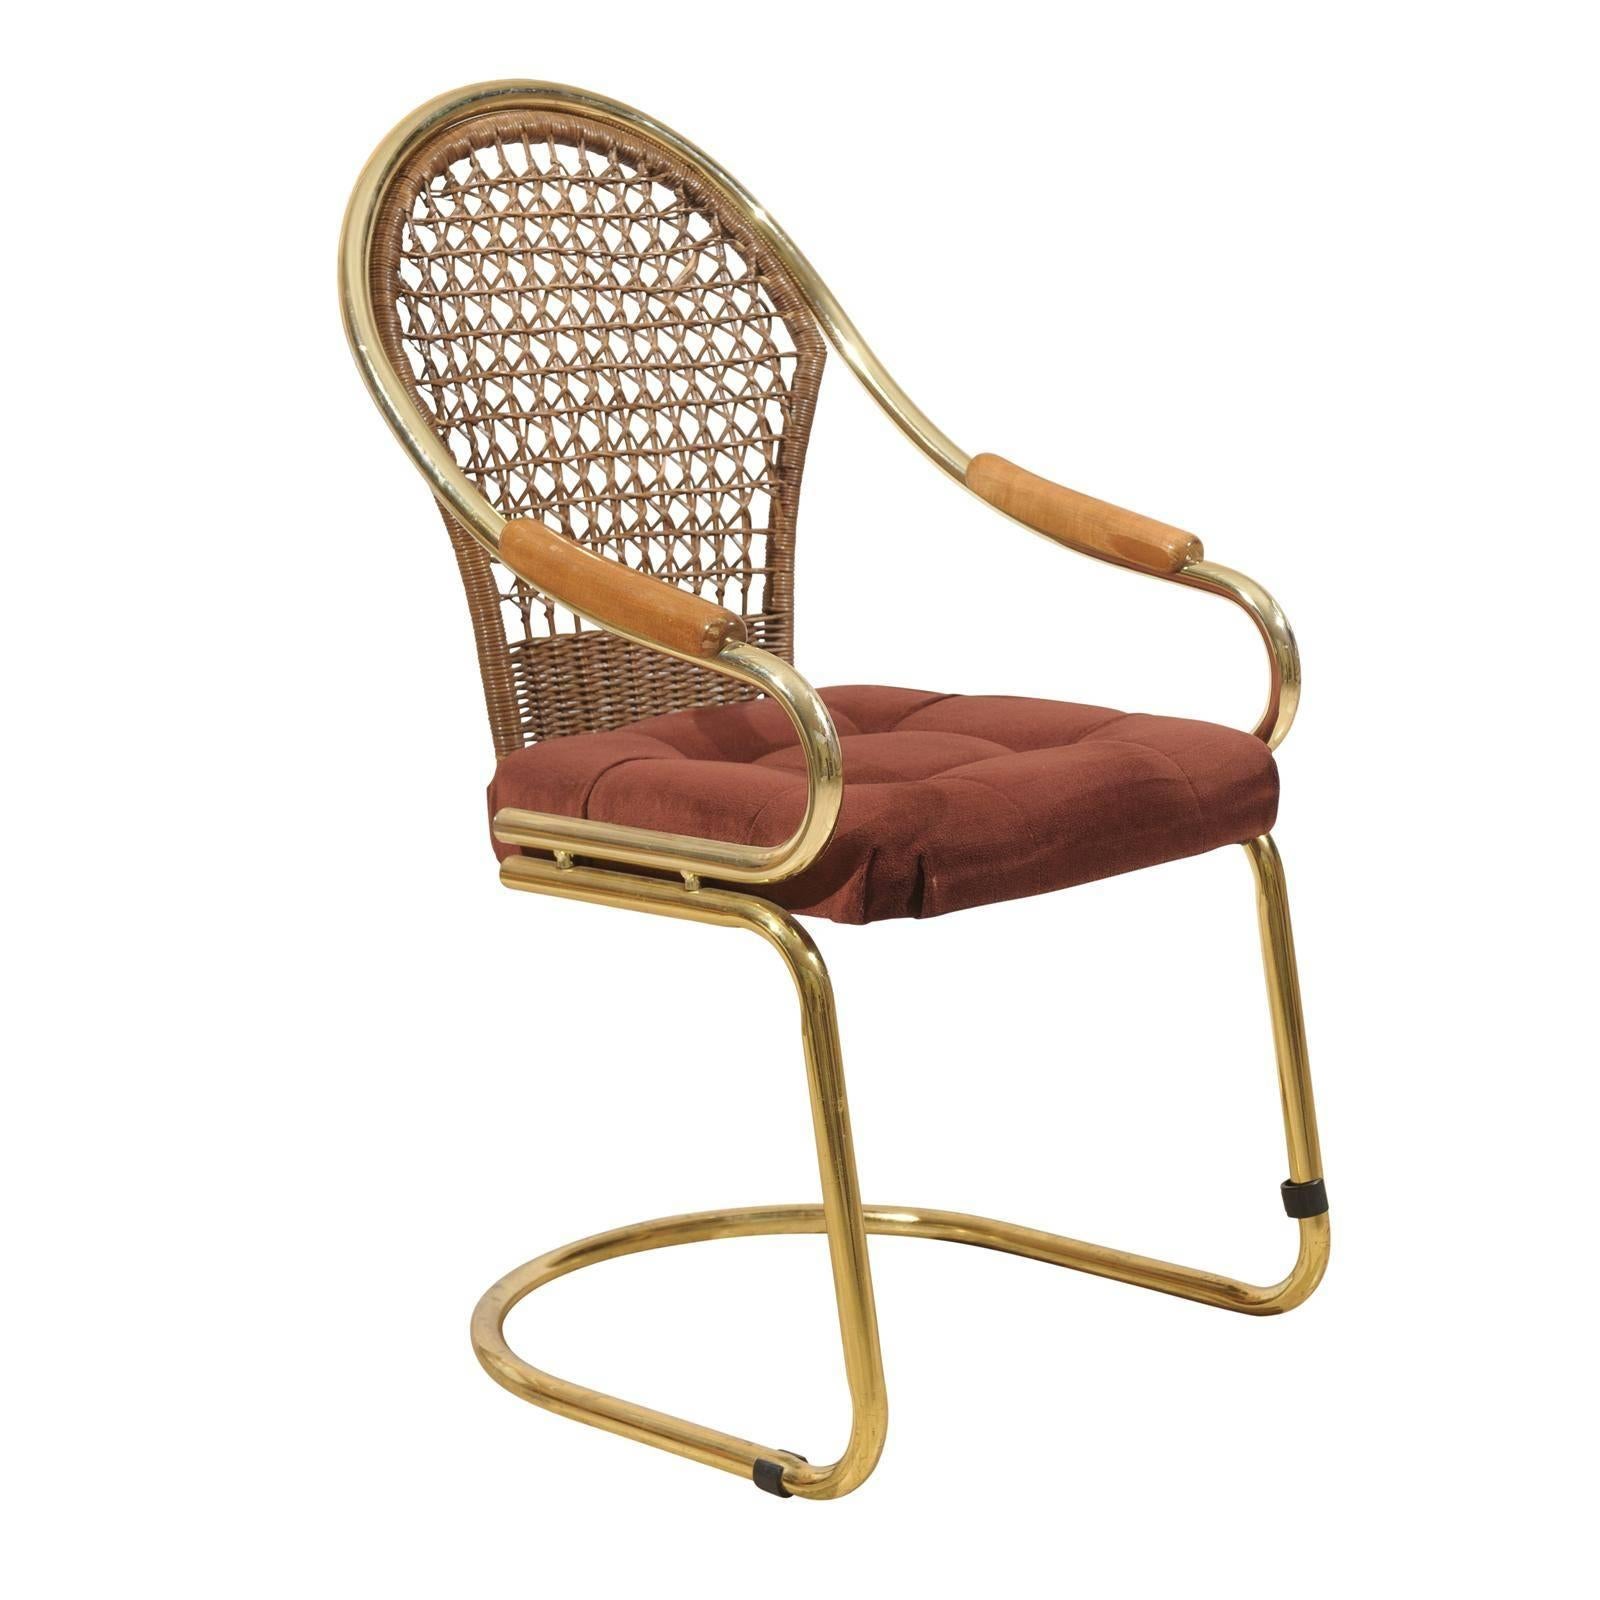 Brass and Cane Cantilevered Desk Chair